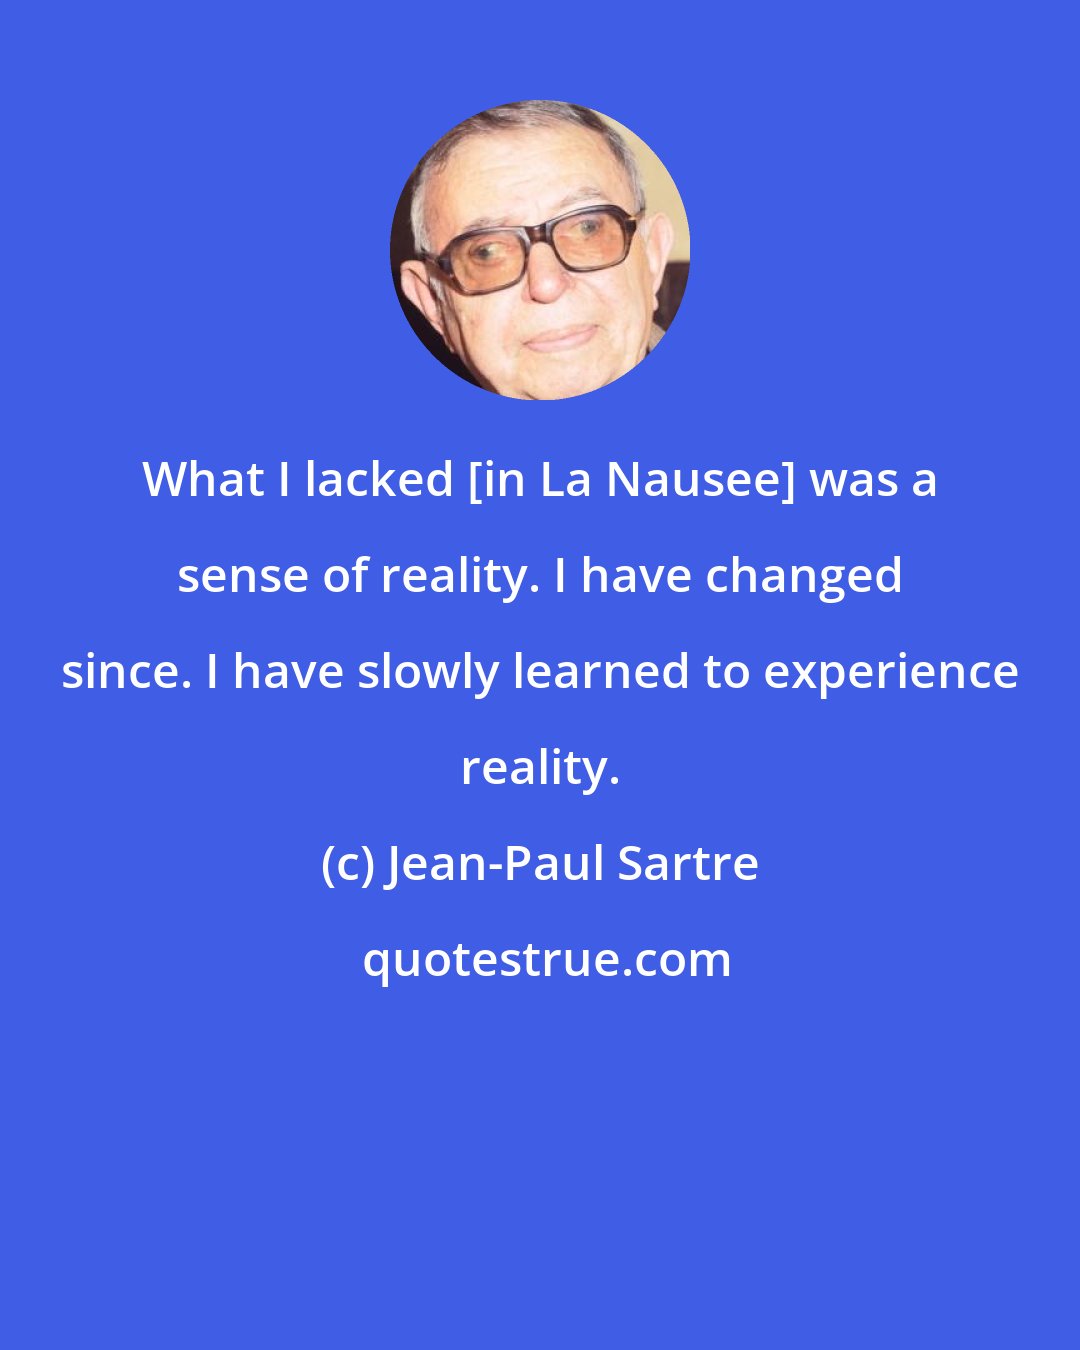 Jean-Paul Sartre: What I lacked [in La Nausee] was a sense of reality. I have changed since. I have slowly learned to experience reality.